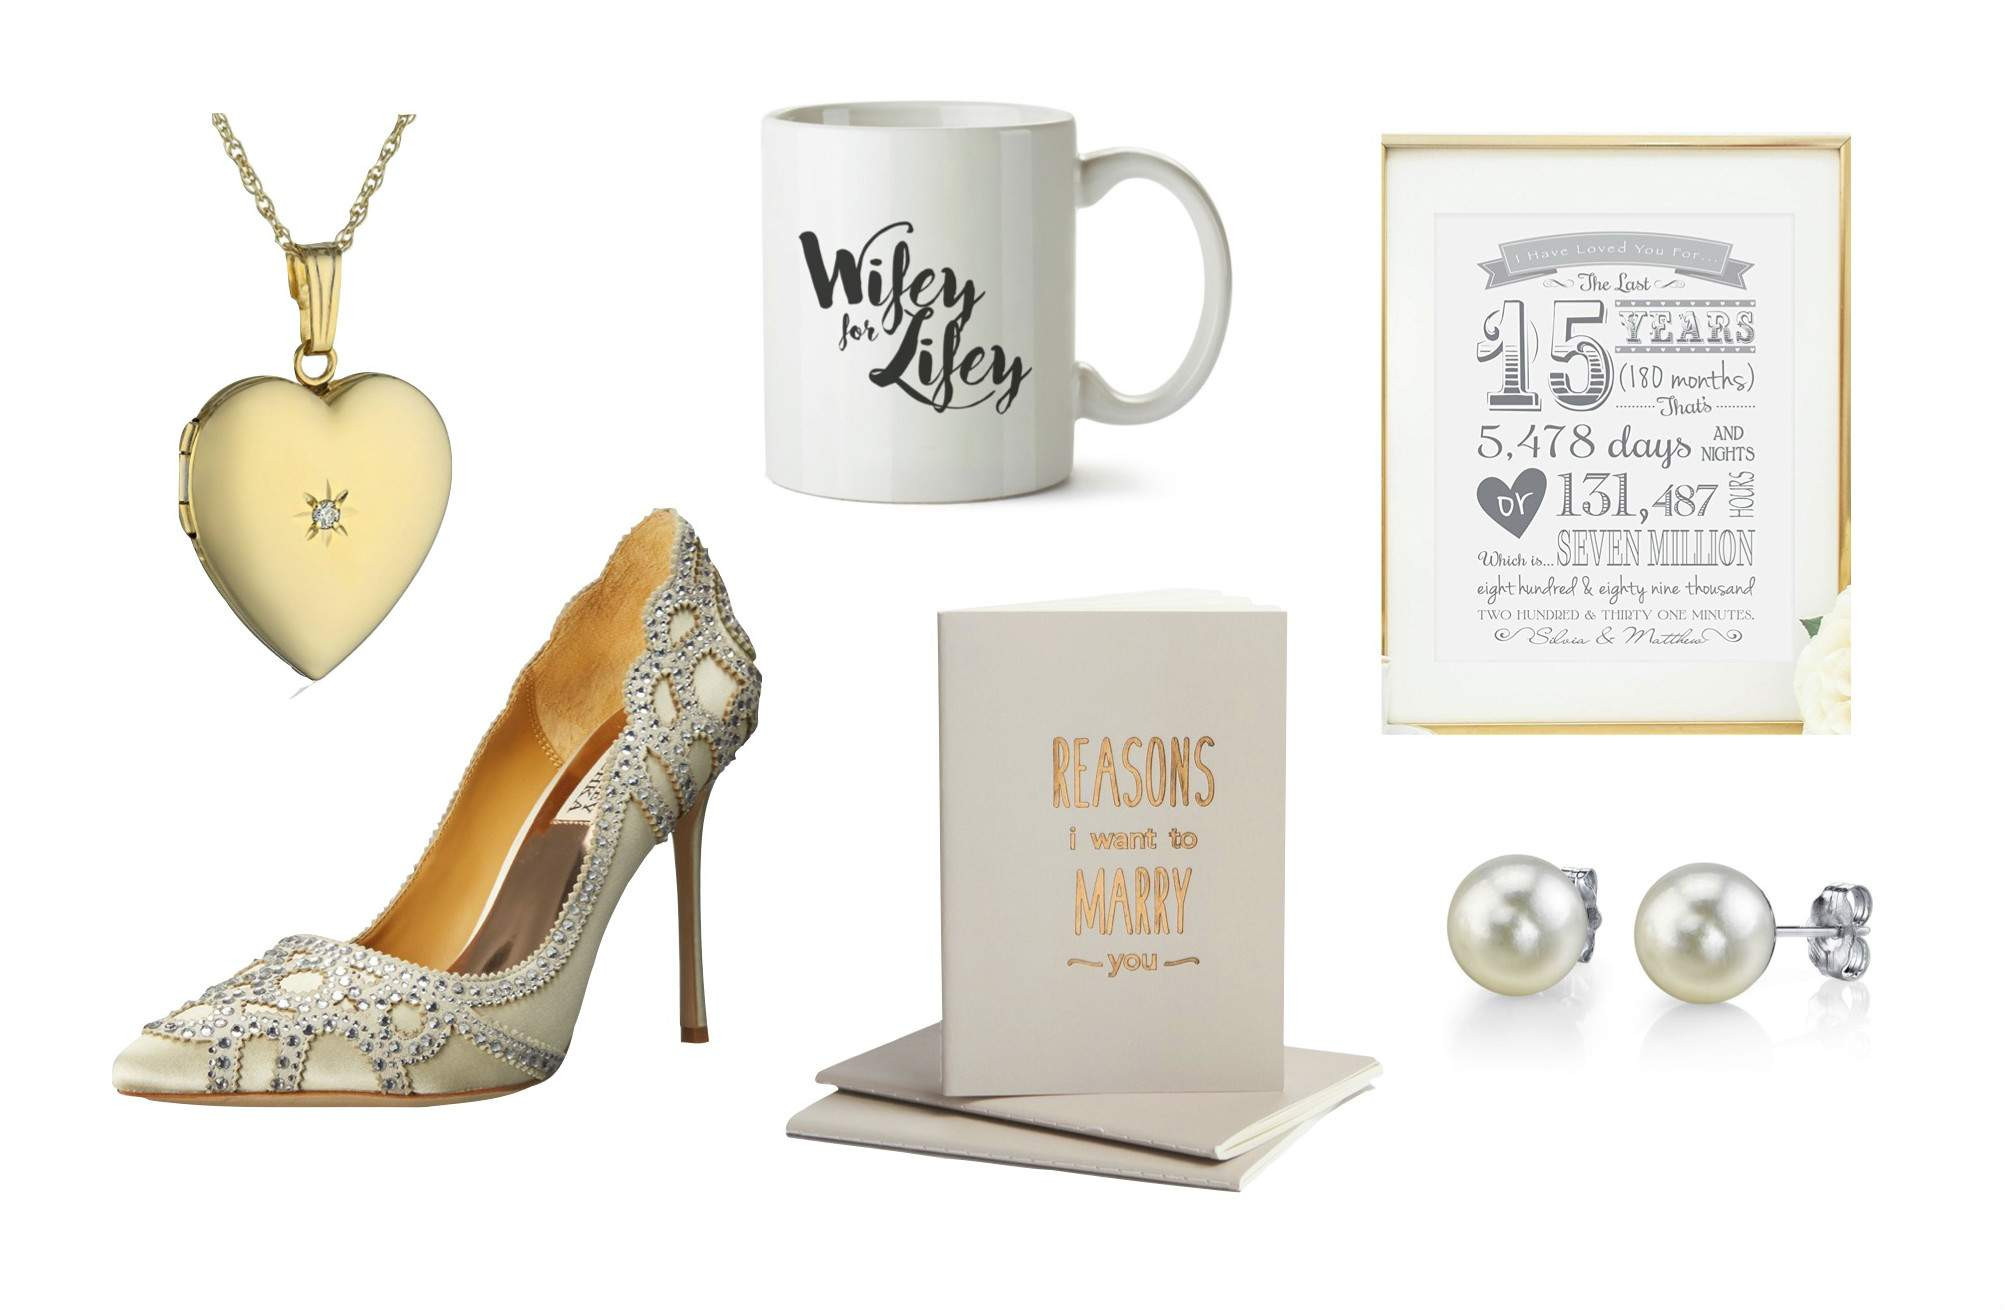 Wedding Gift From Bride To Groom
 Best Wedding Day Gift Ideas From the Groom to the Bride